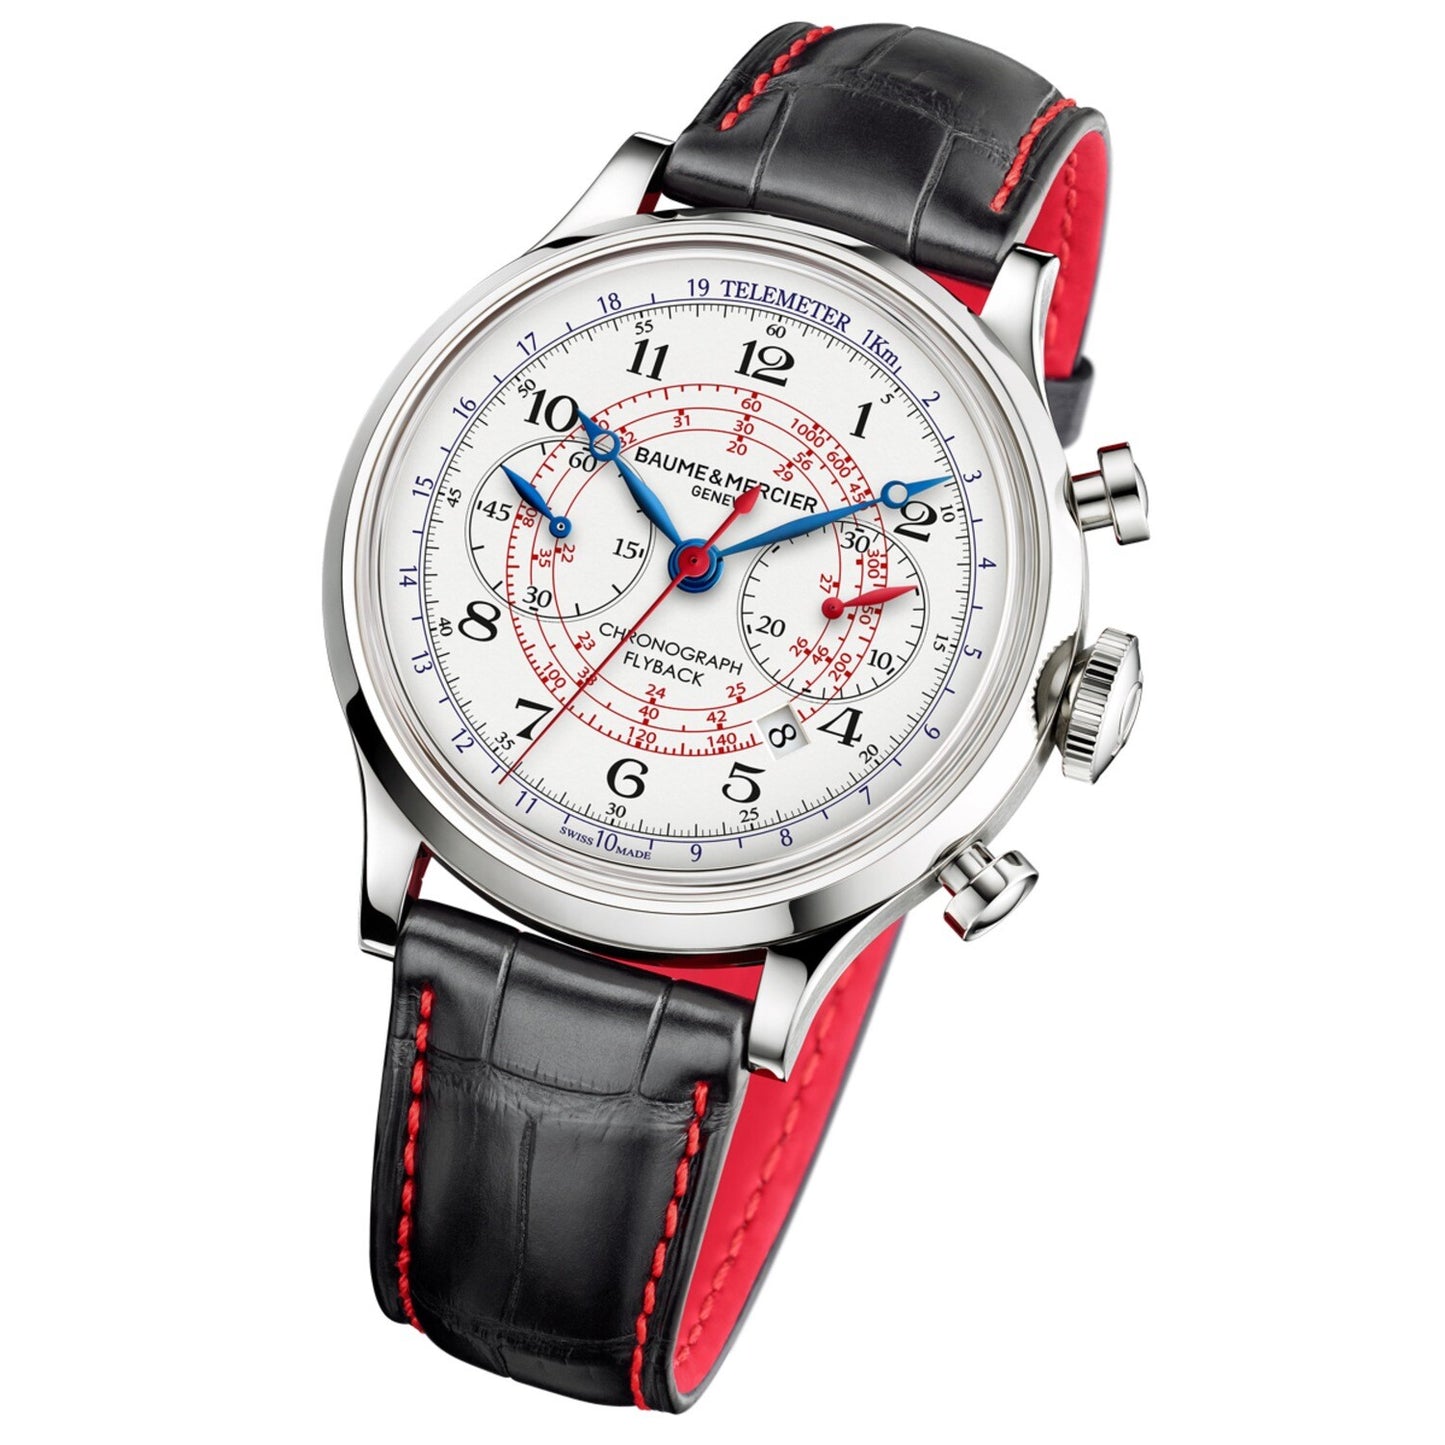 Baume et Mercier Capeland Flyback Passione Engadina limited-edition